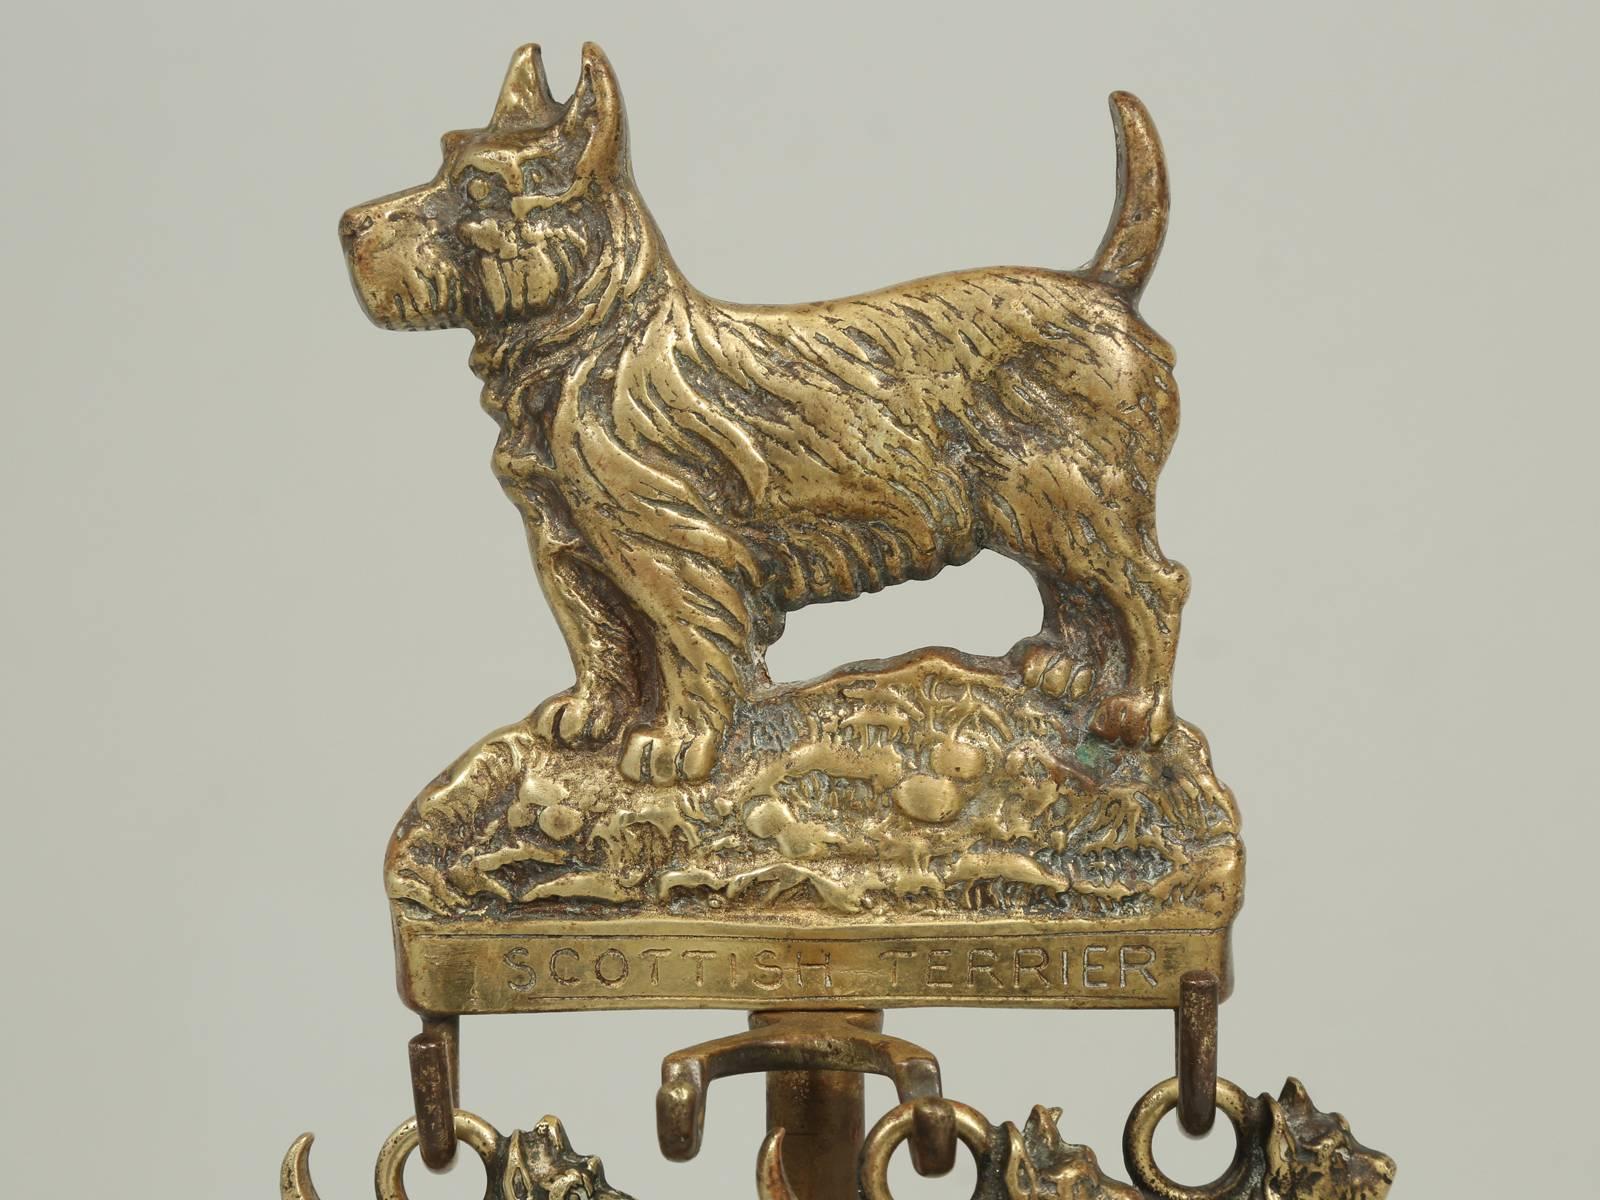 Wonderful antique French dog fireplace tool set and yes, it is missing a couple of tools, but I could not resist being a dog lover. Made from solid brass and is not a cheap plated copy. Appears to be made in the early 1900s and is perfect for any